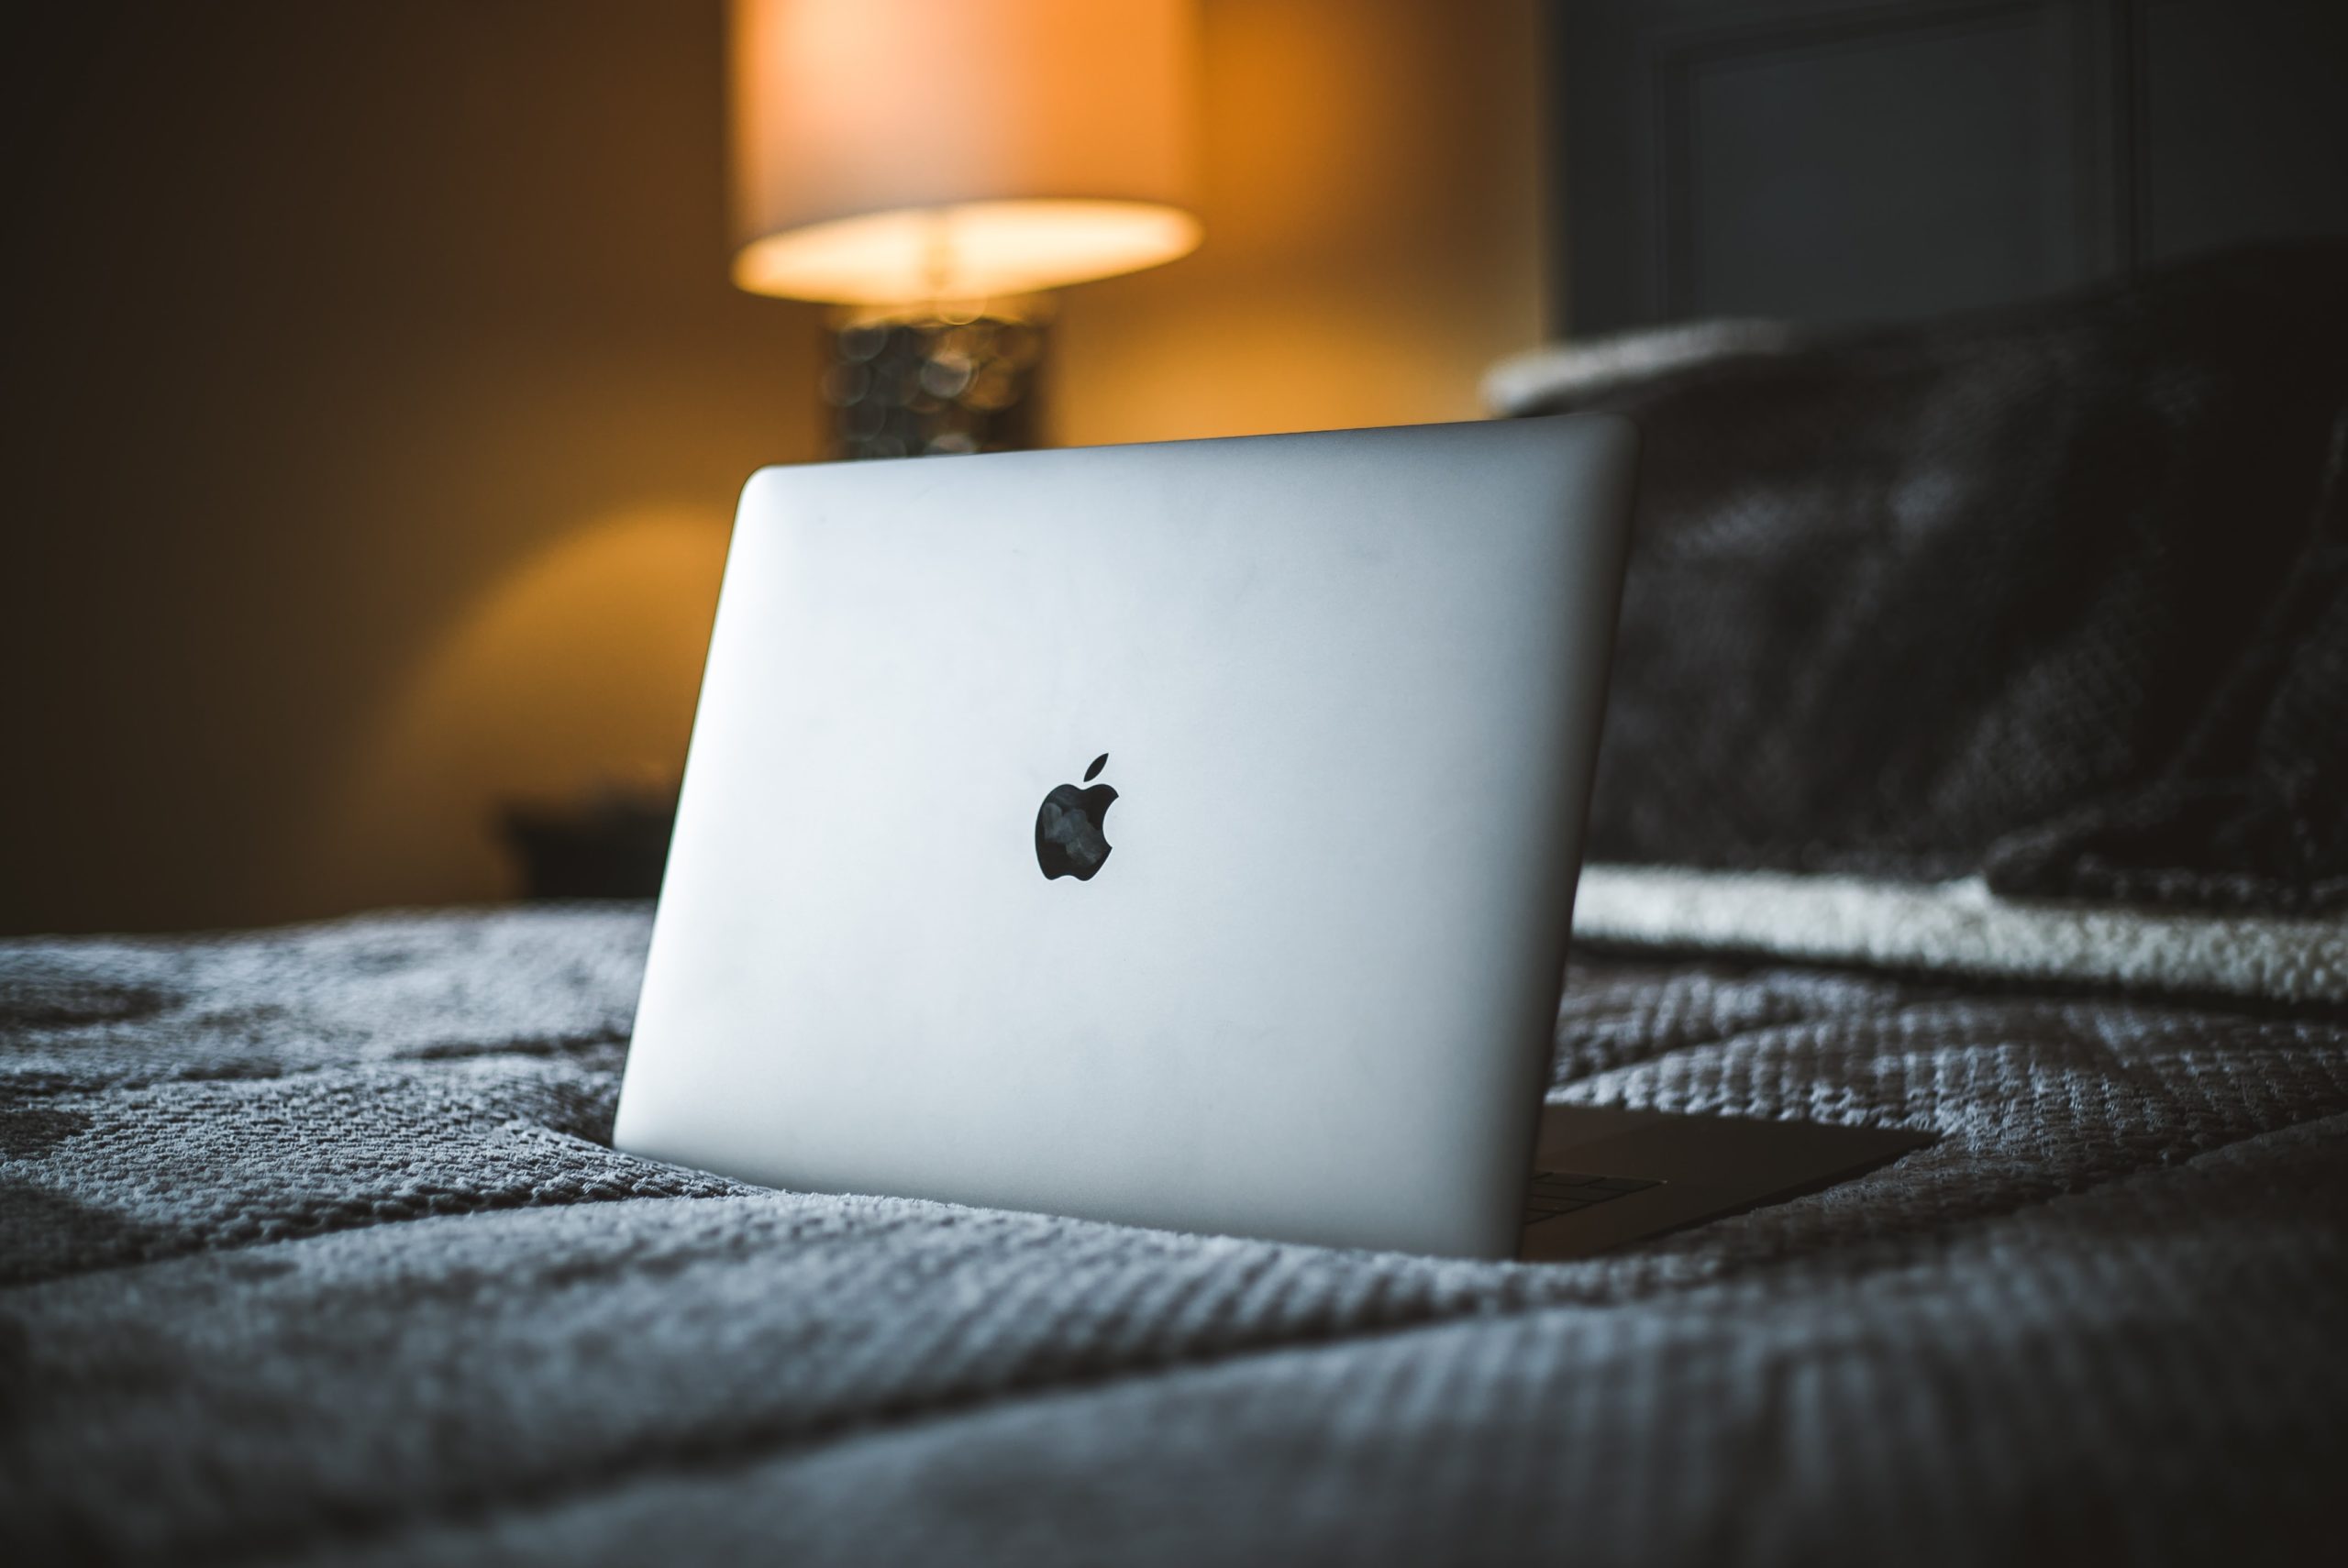 Mysterious Mac Malware Emerges - Apple Users at Increased Risk